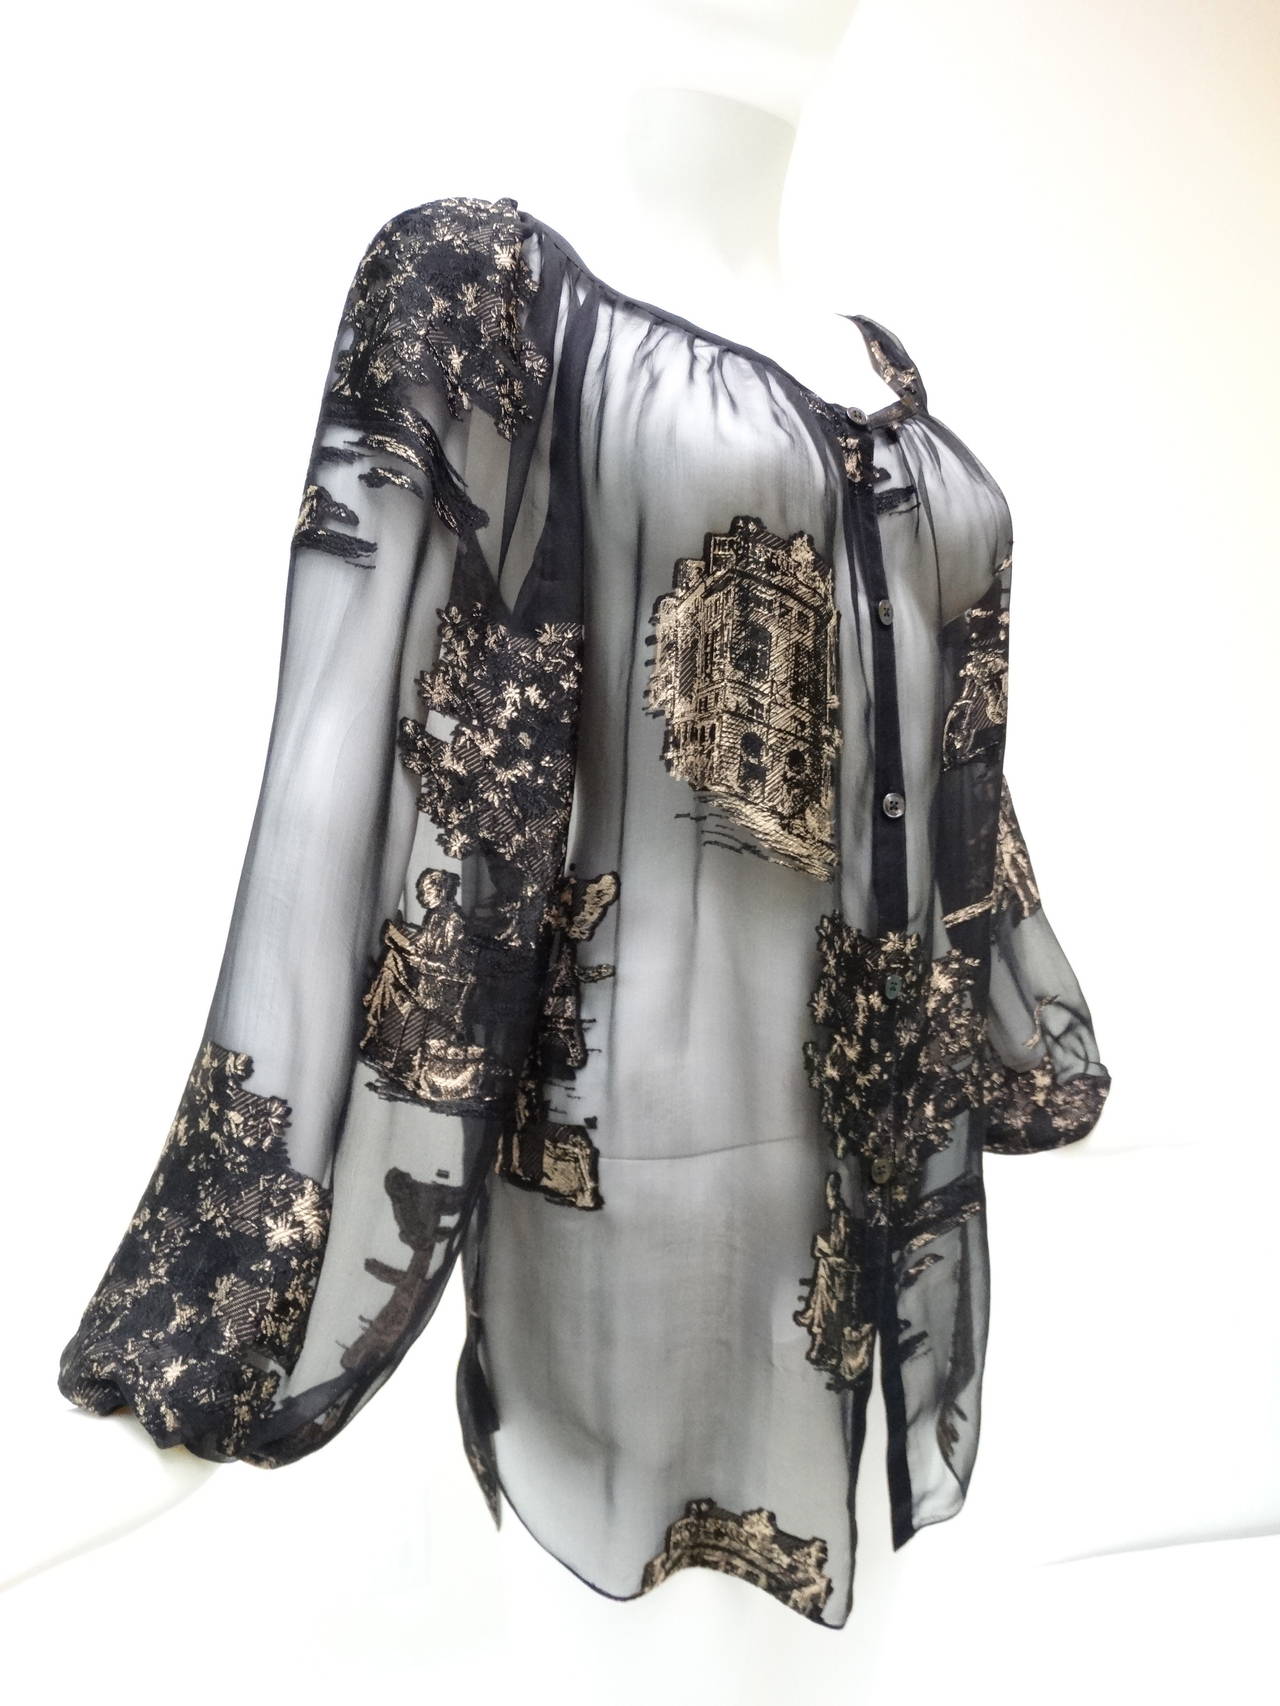 This rare beautiful sheer Hermes blouse is made from light as air, sheer jet black silk with a tan and black French scenic prints in silk. It has a very loose fit, buttons up the front with a scoop neckline and has big billowy sleeves. All buttons